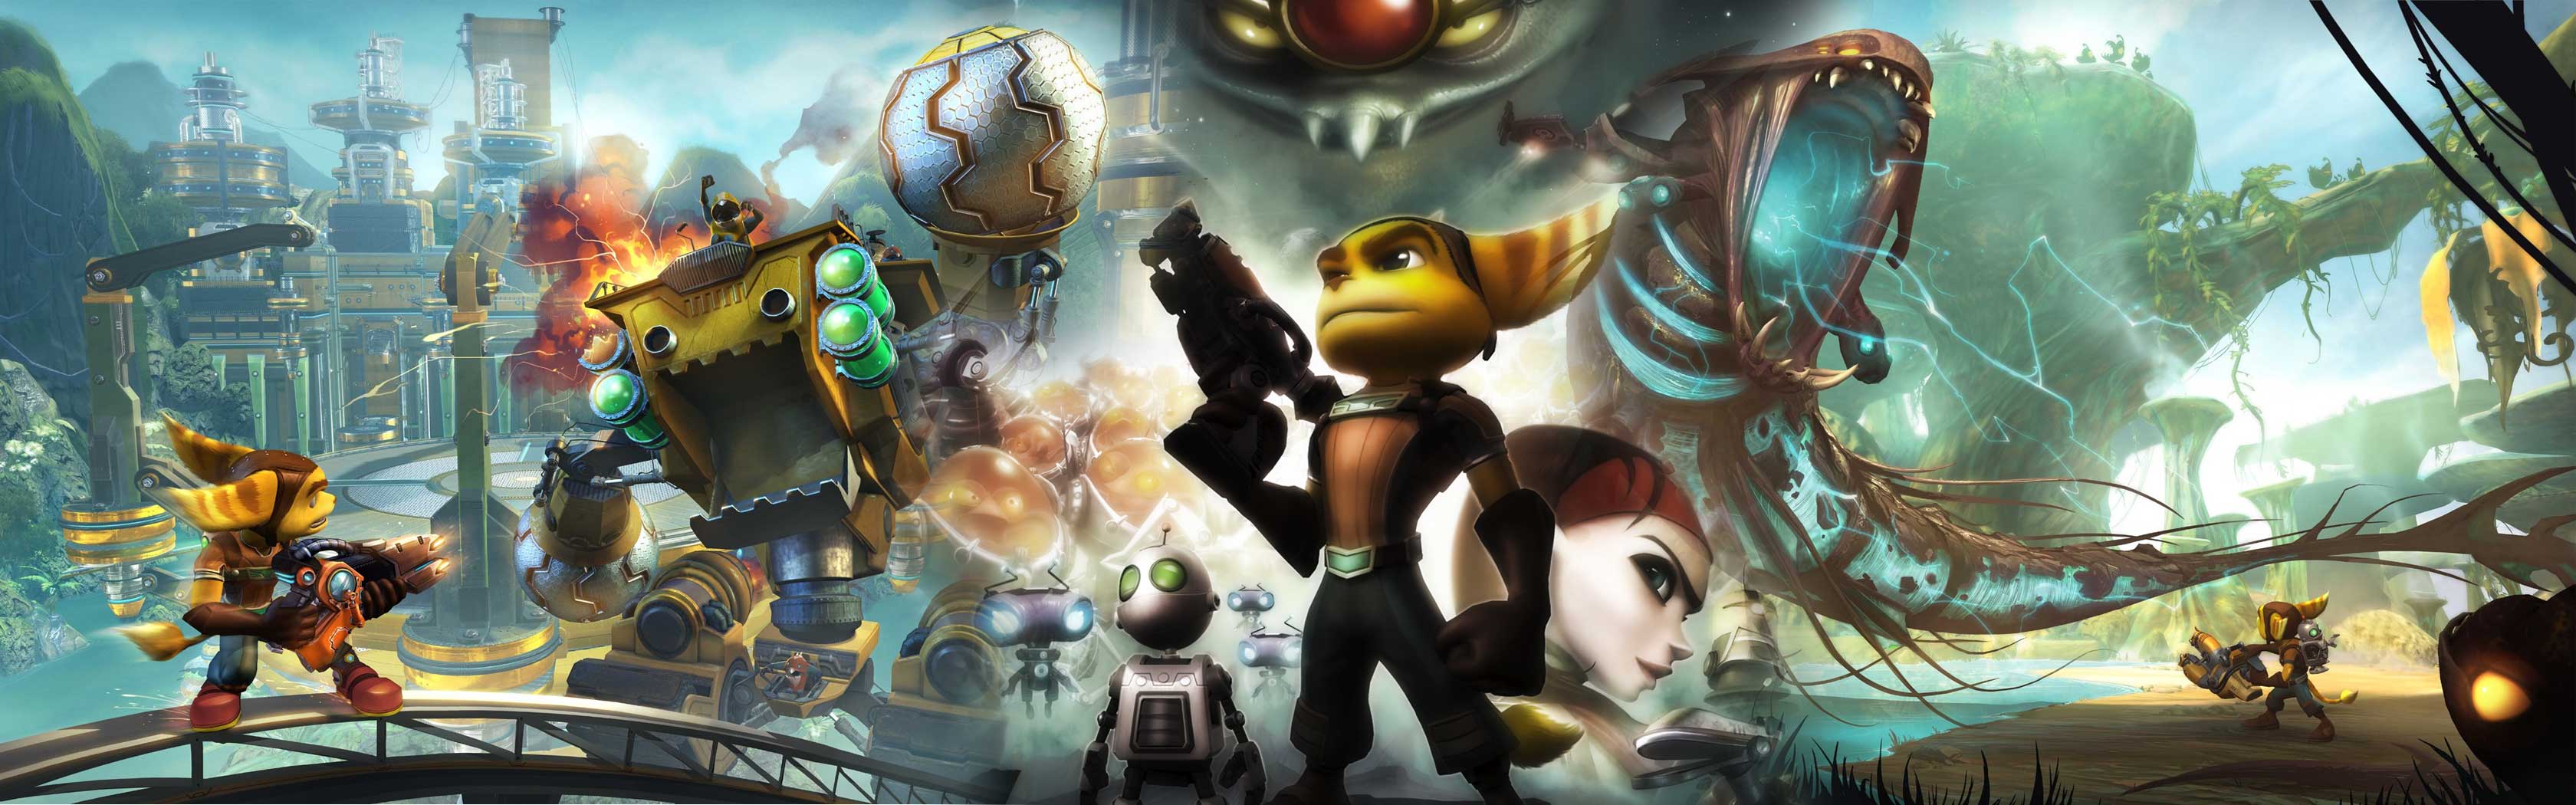 Video Game Ratchet Amp Clank 3360x1050